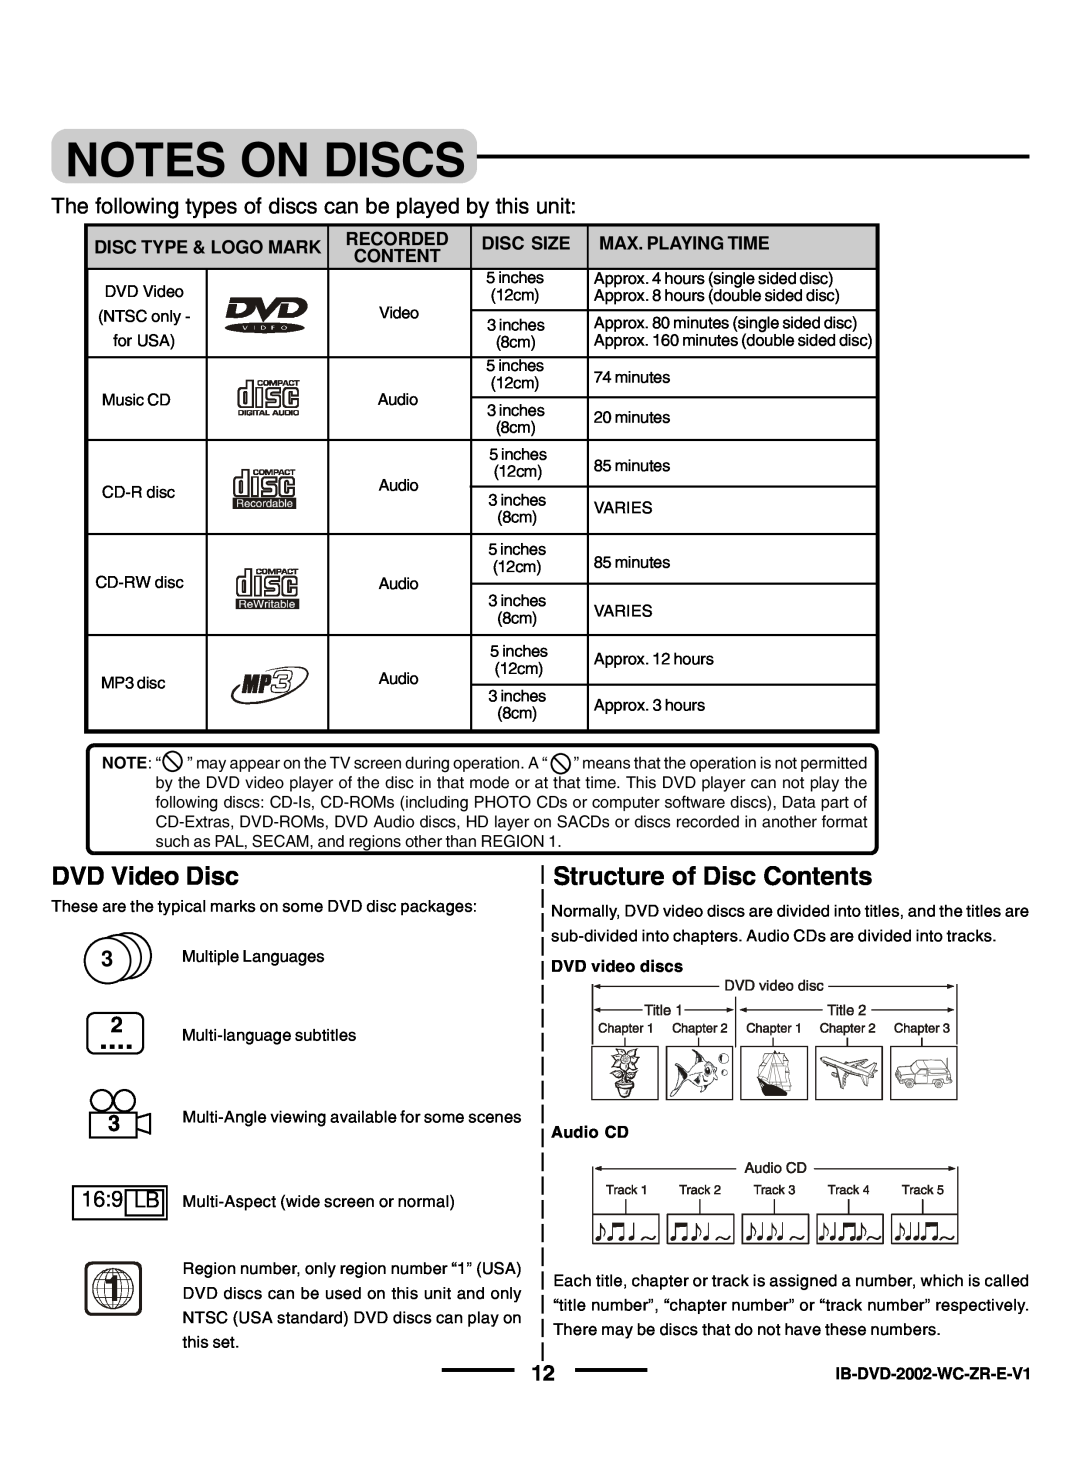 Lenoxx Electronics DVD-2002 Notes On Discs, DVD Video Disc, Structure of Disc Contents, 169 LB, Disc Type & Logo Mark 